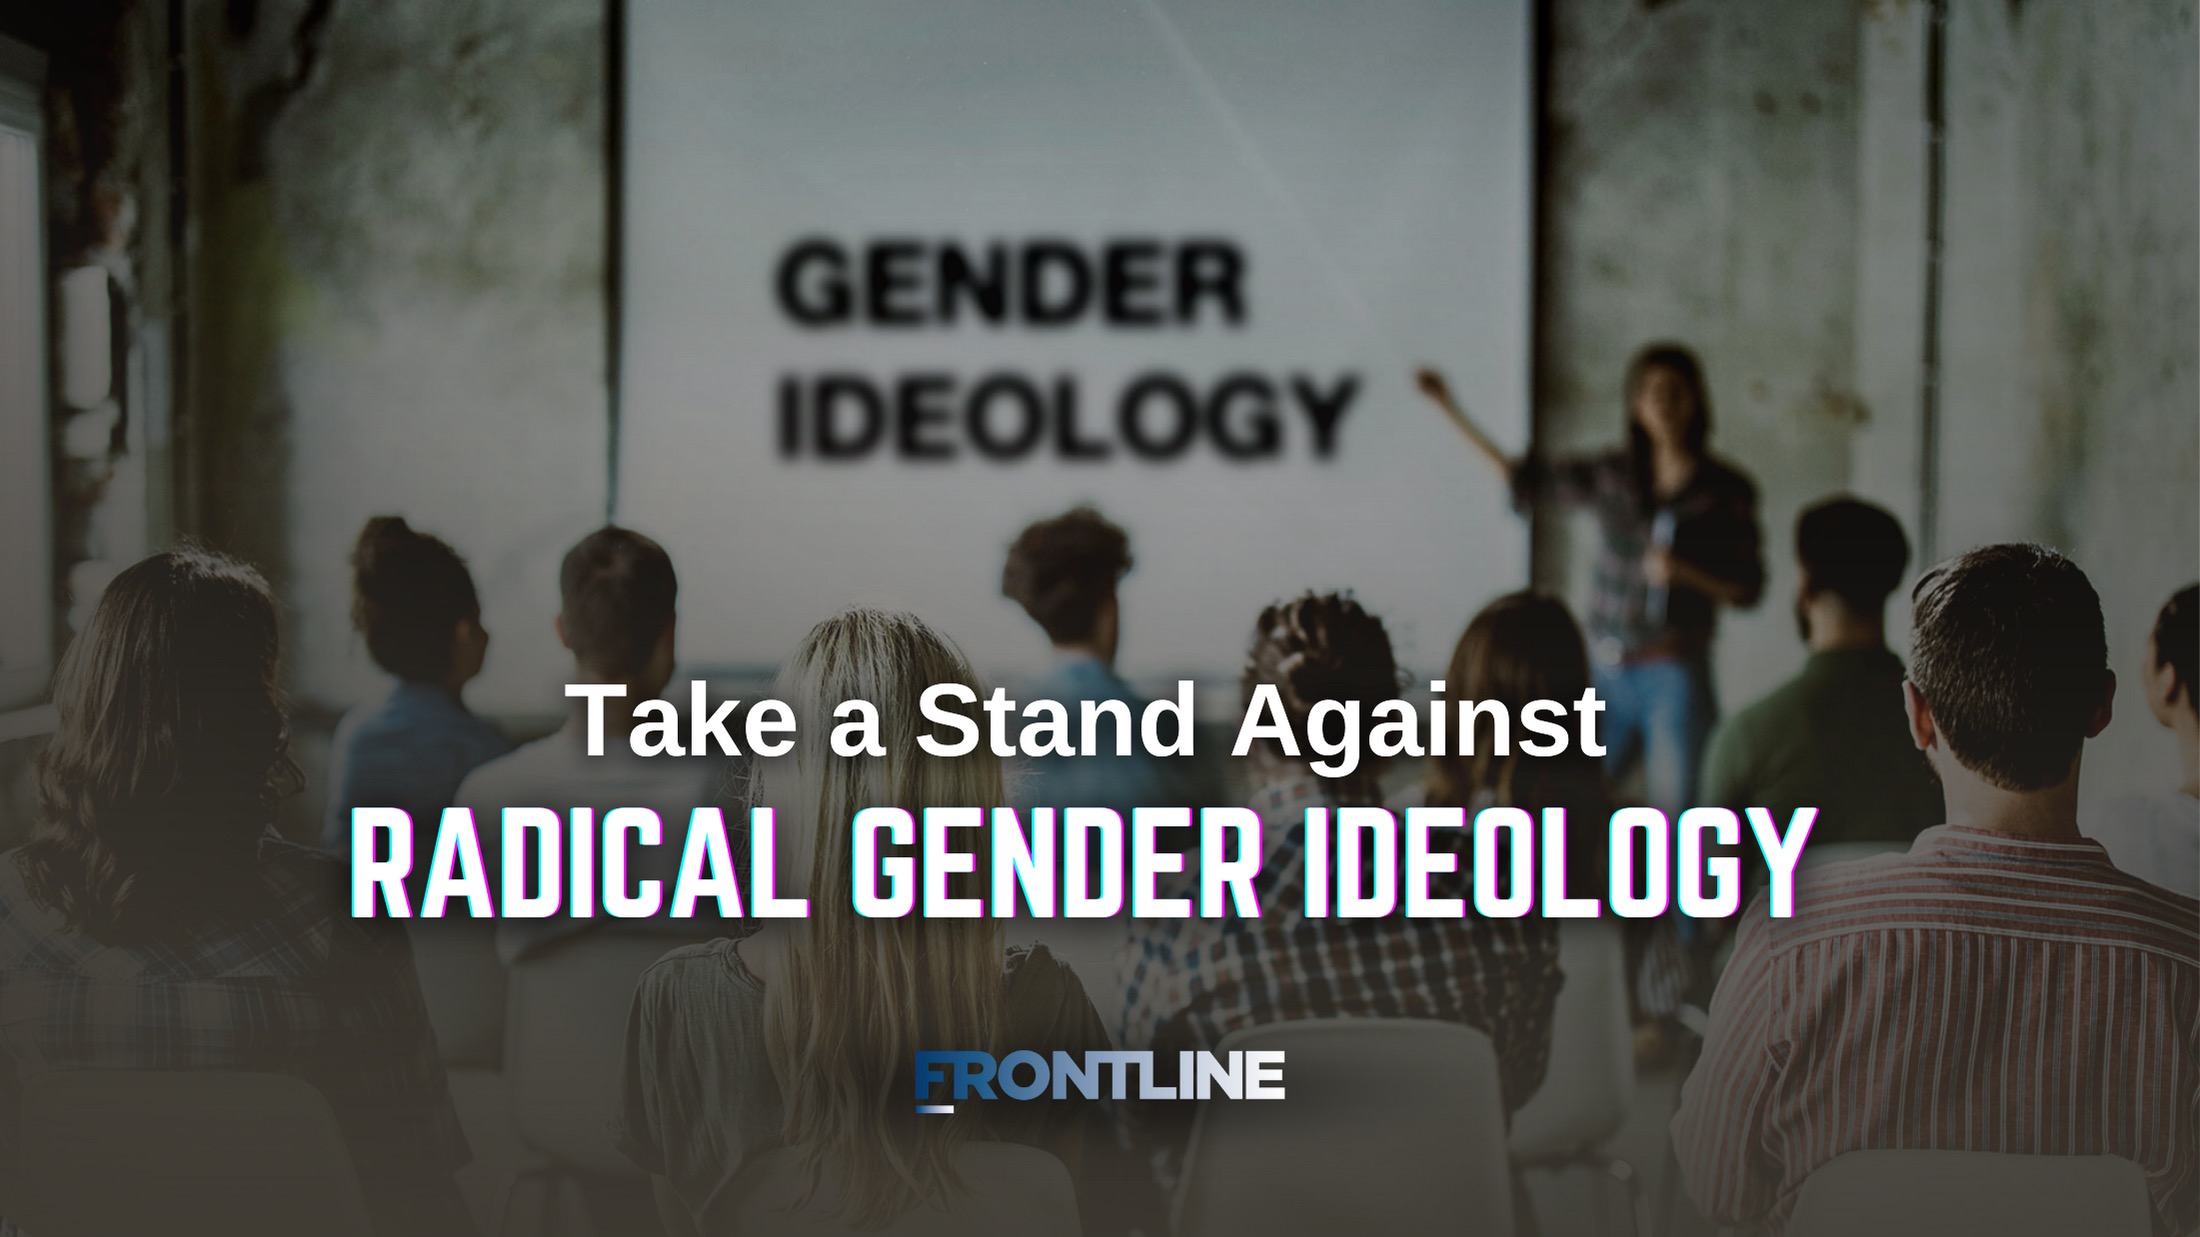 Take a Stand Against Woke Gender Ideology